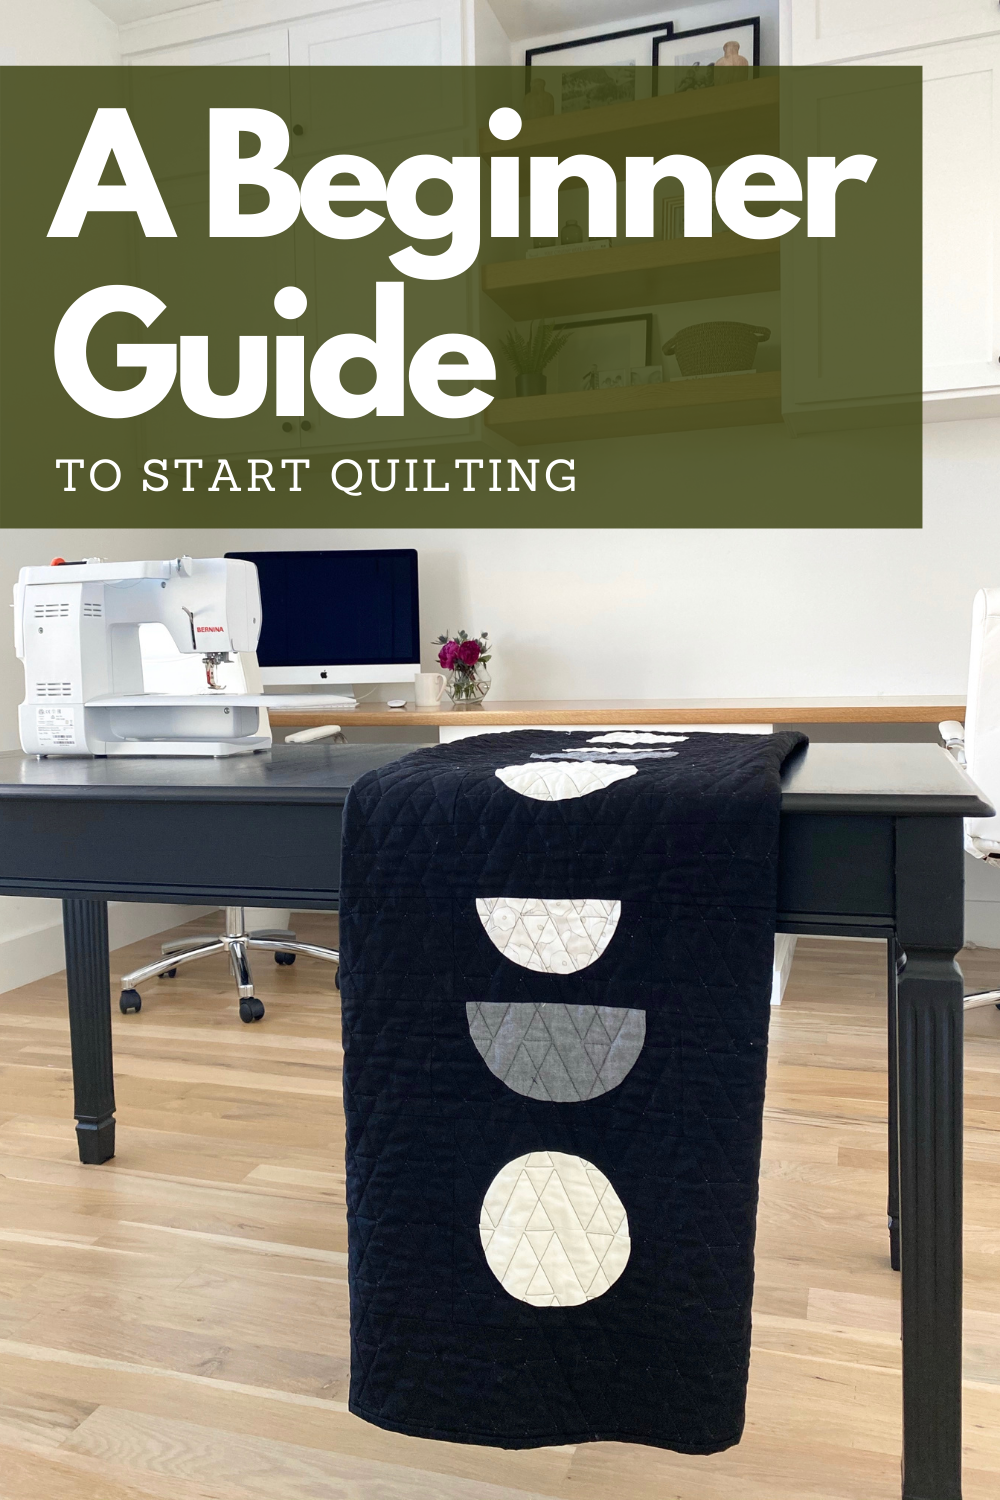 The Ultimate Beginner's Guide to Quilt Batting